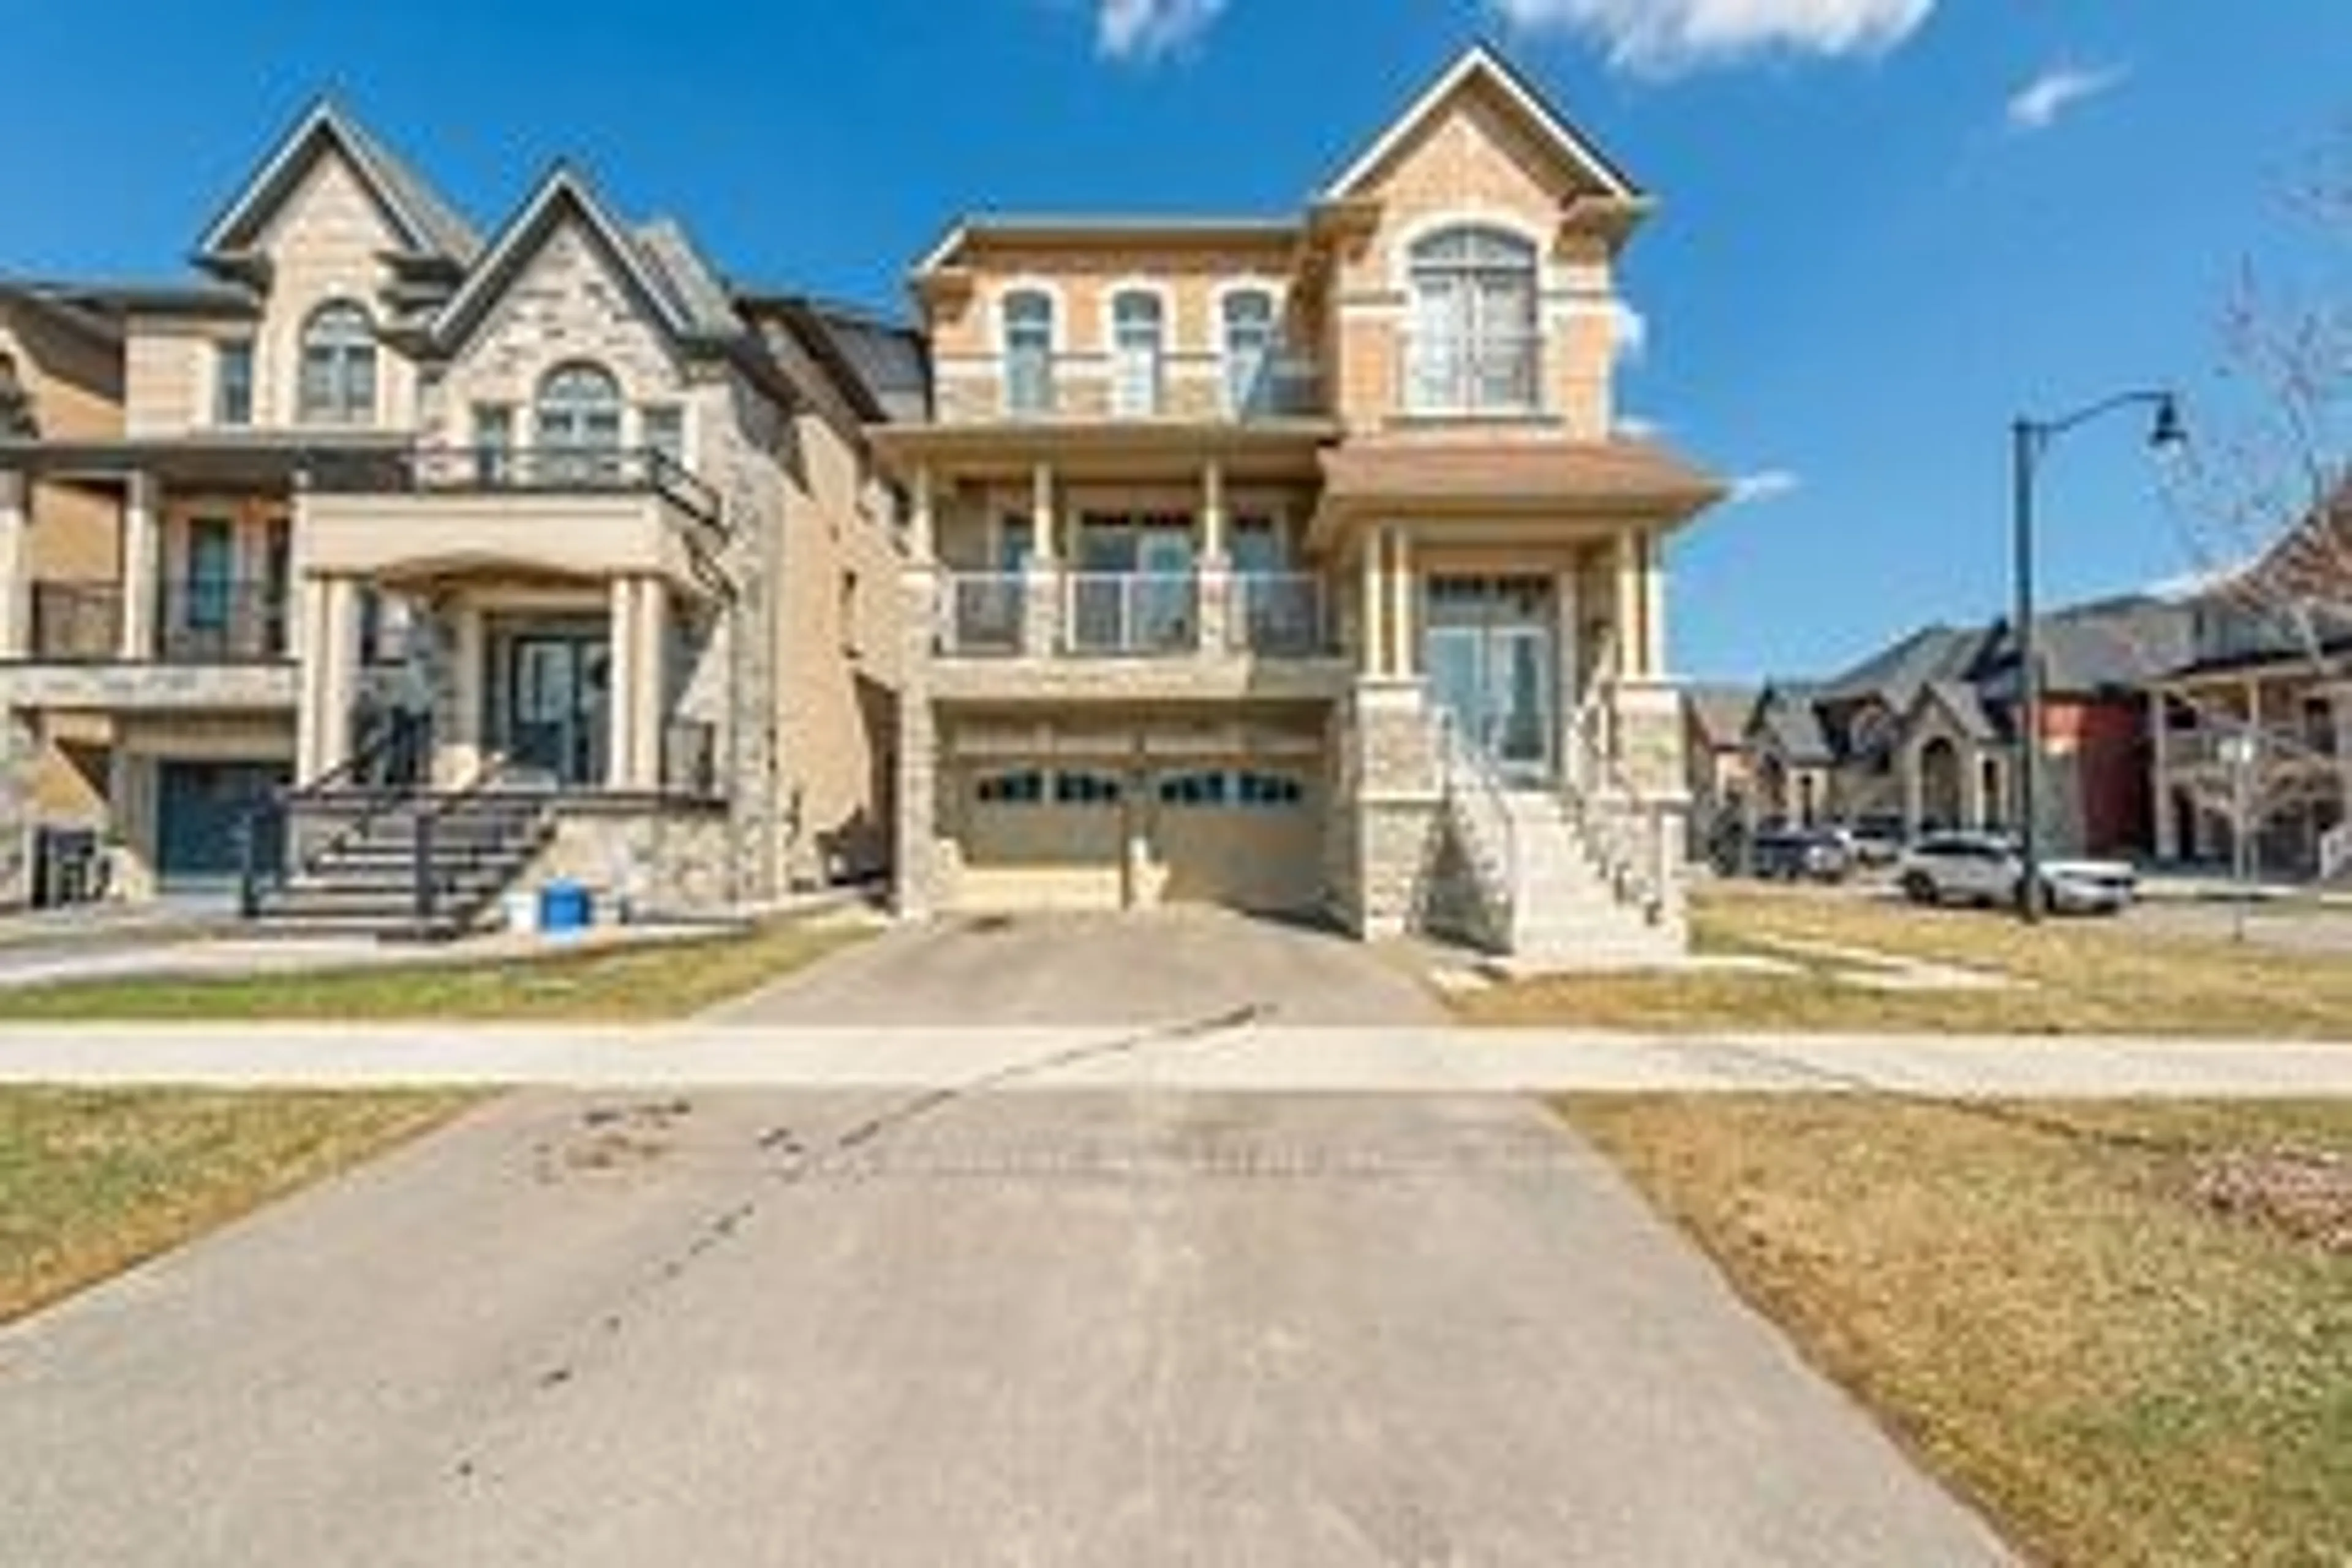 Home with brick exterior material for 495 Queen Mary Dr, Brampton Ontario L7A 4Y1